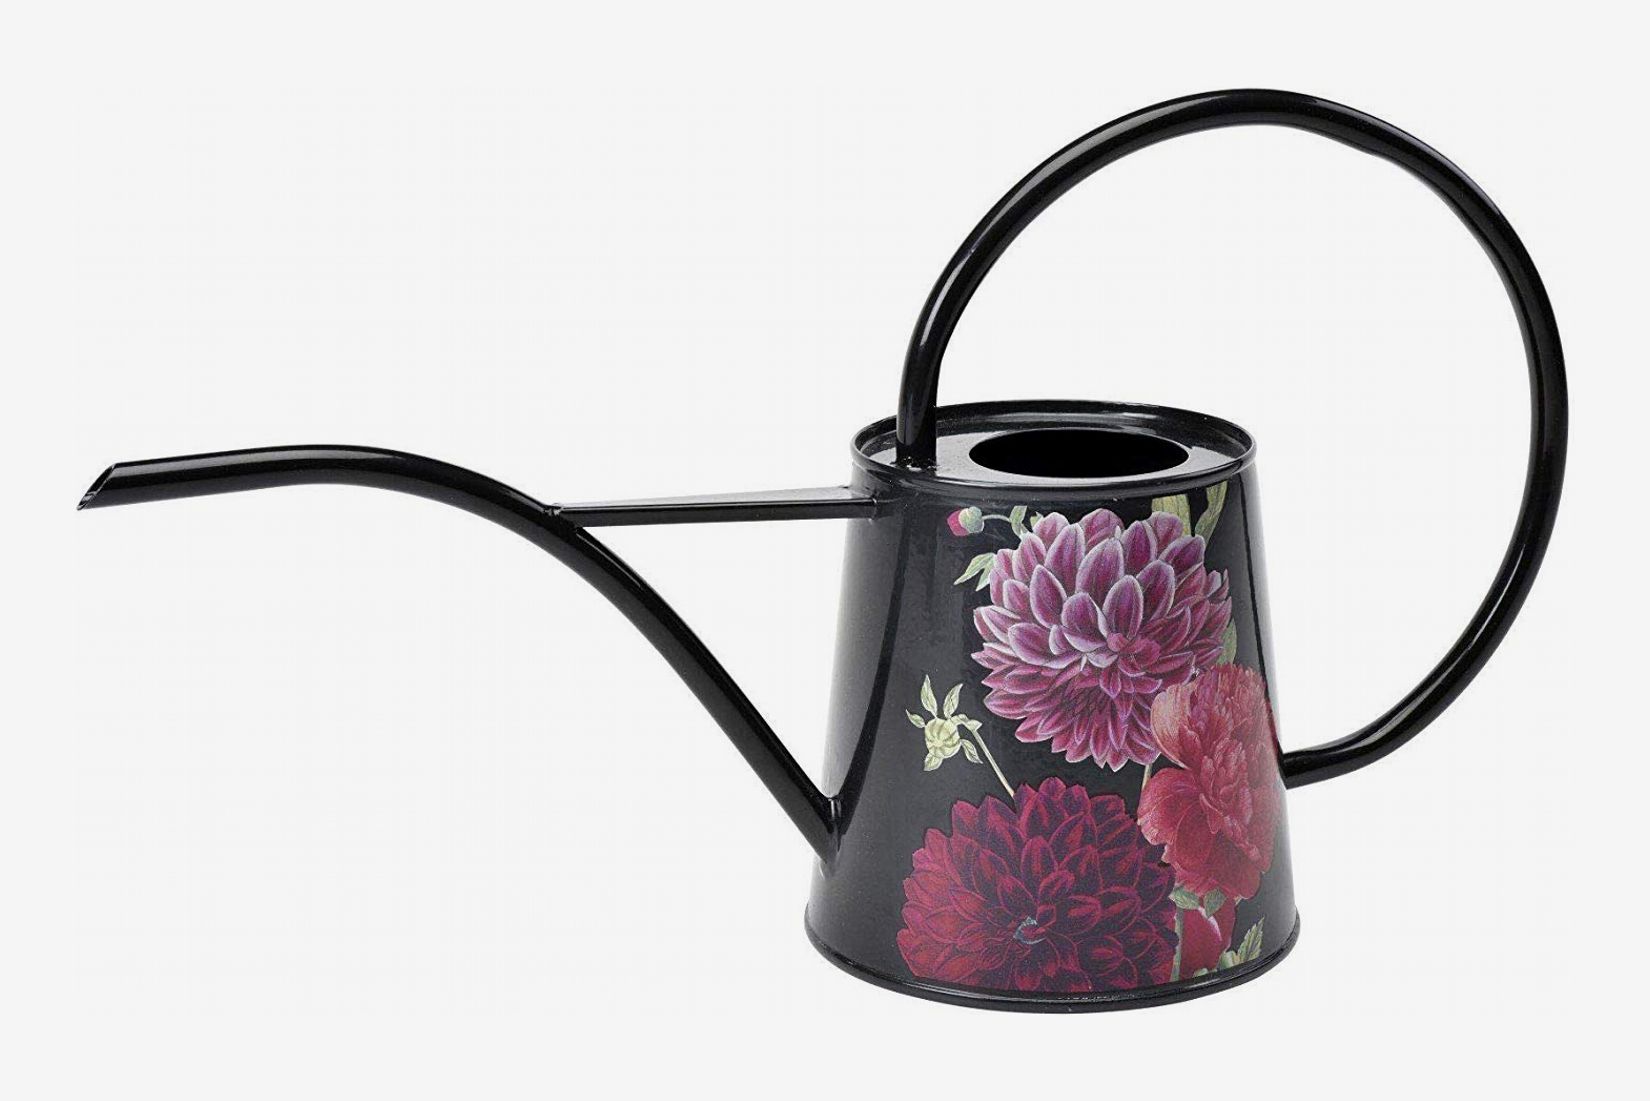 BESPORTBLE 2pcs Watering Can Long Spout Watering Kettle Nordic Style Garden Watering Pot Elegant Watering Pot for Indoor and Outdoor Watering Plants and Potted Flowers